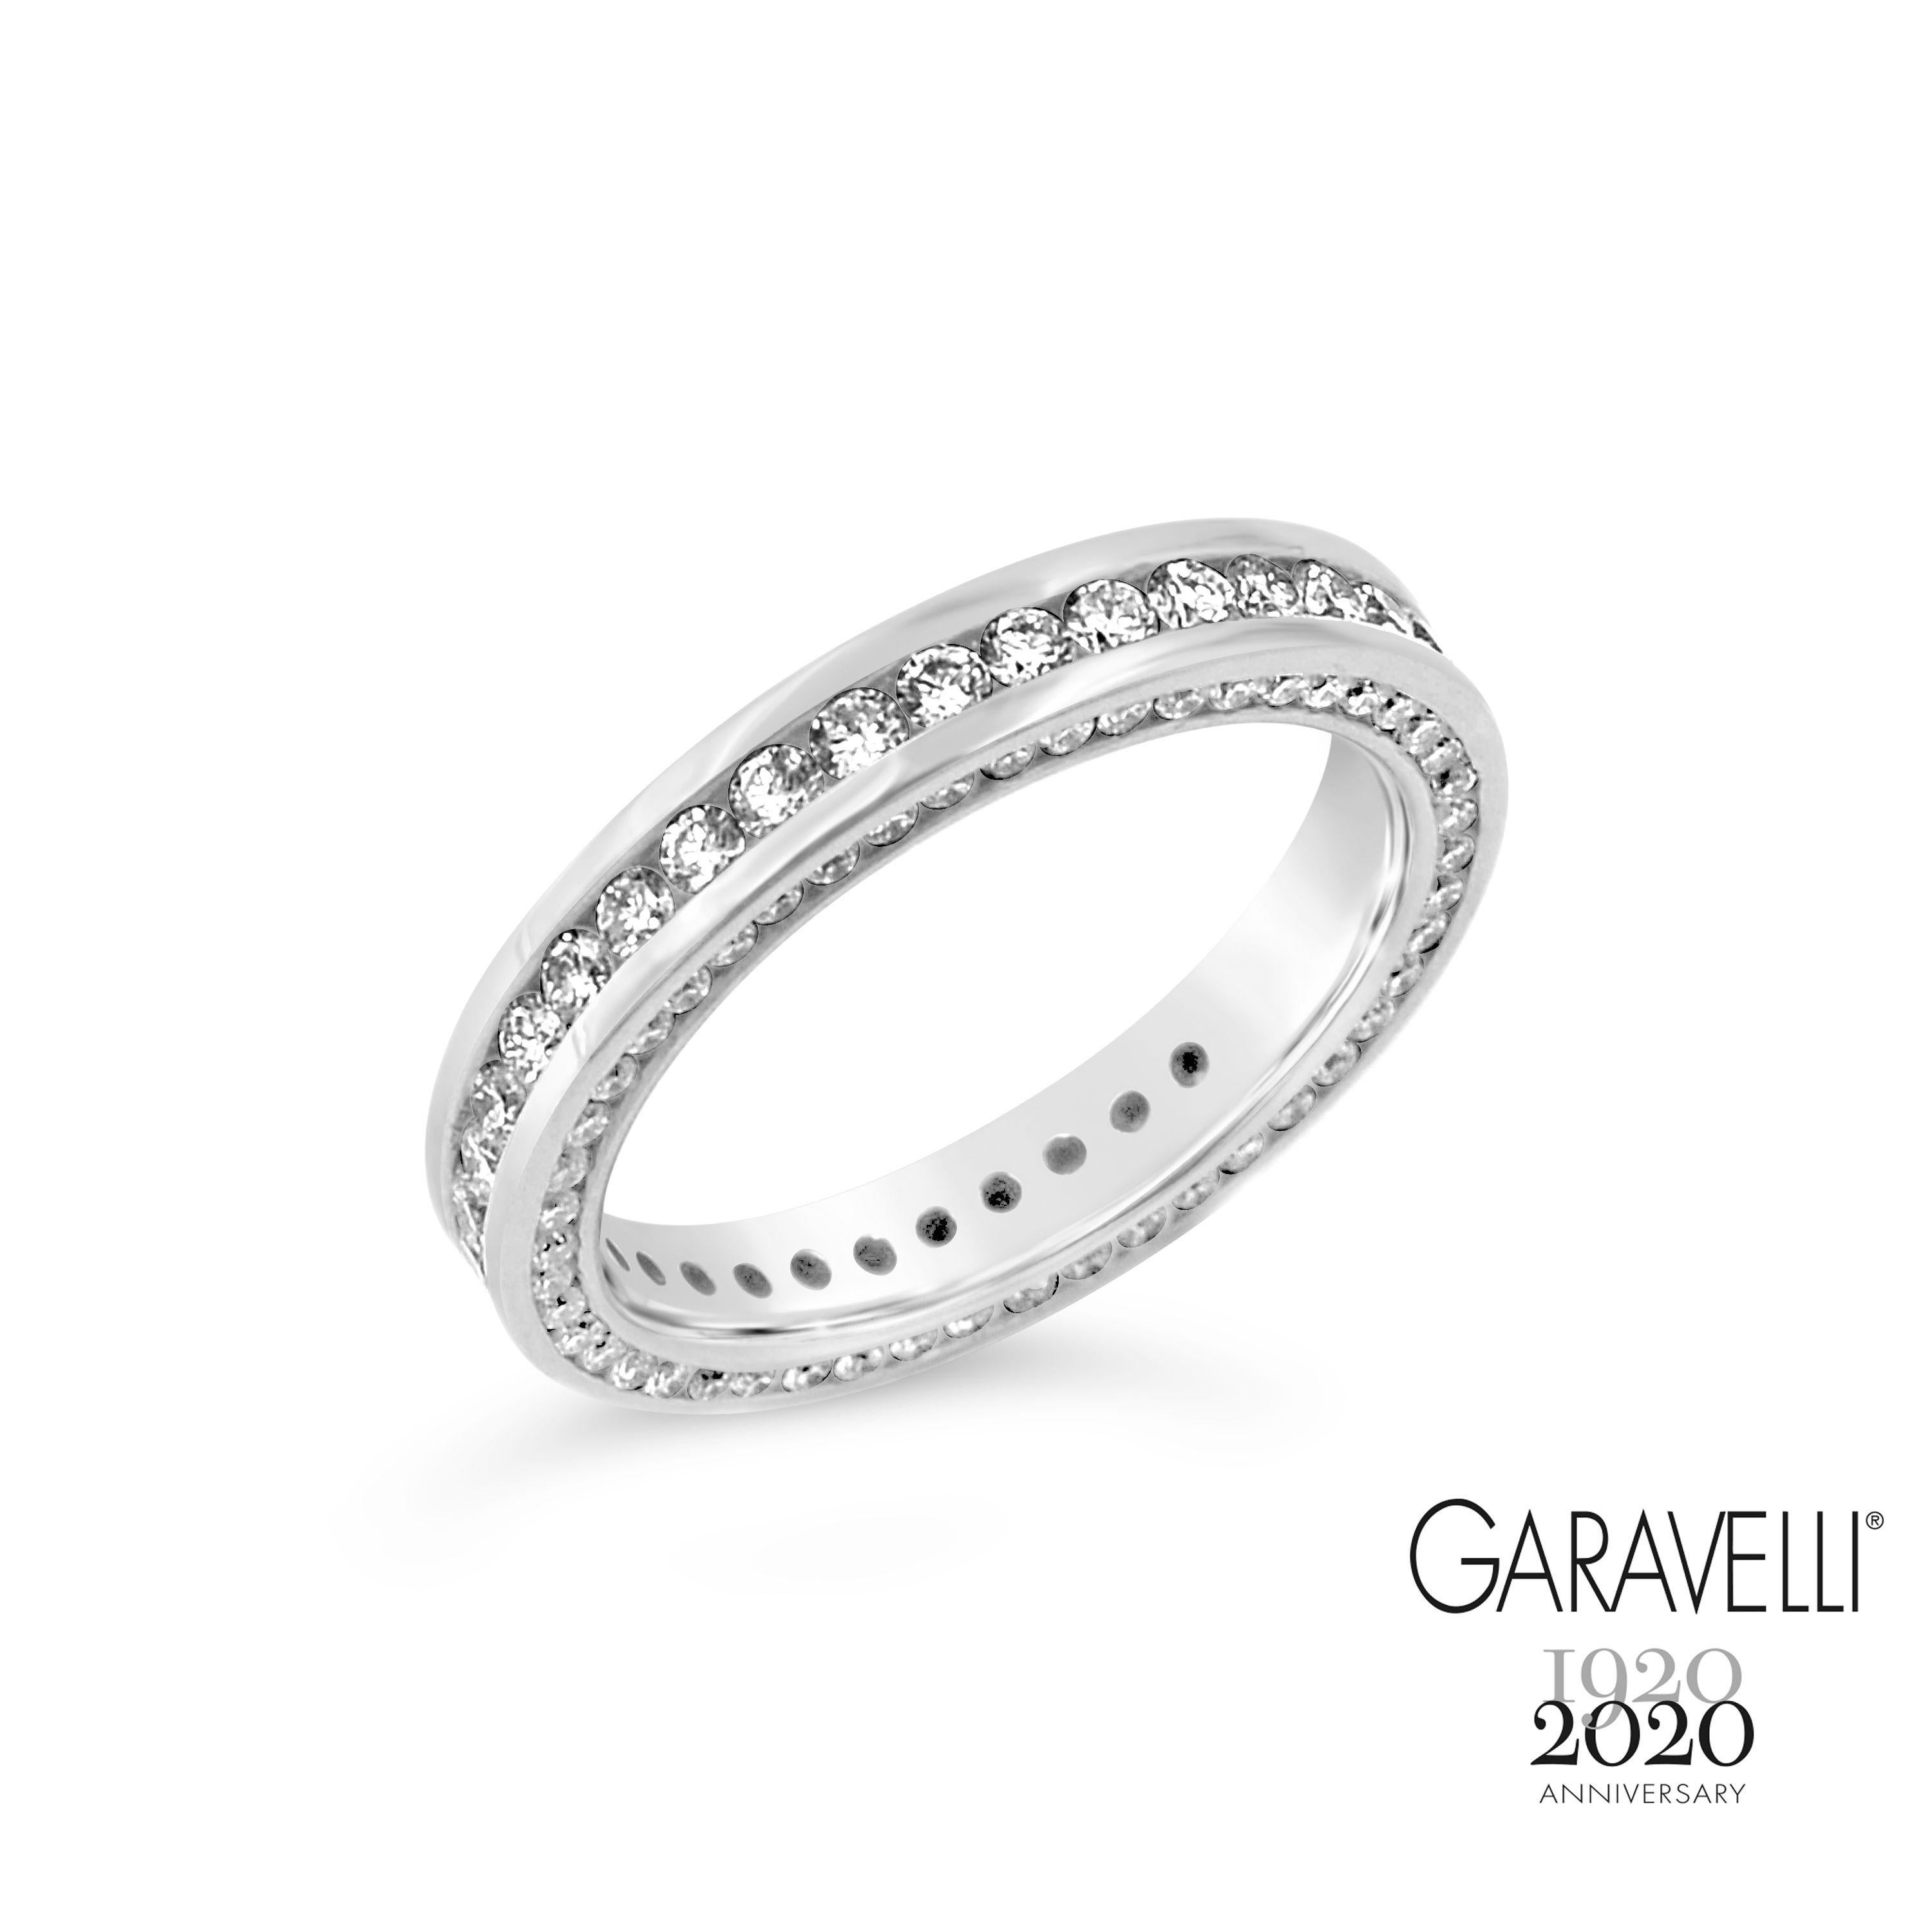 Garavelli 18 Karat White Gold Diamonds Eternity Band Ring, size 54
This interesting band is set with white diamonds on the three sides.
Made In Italy 
18kt WHITE GOLD gr :4.20
WHITE DIAMONDS ct 1.49